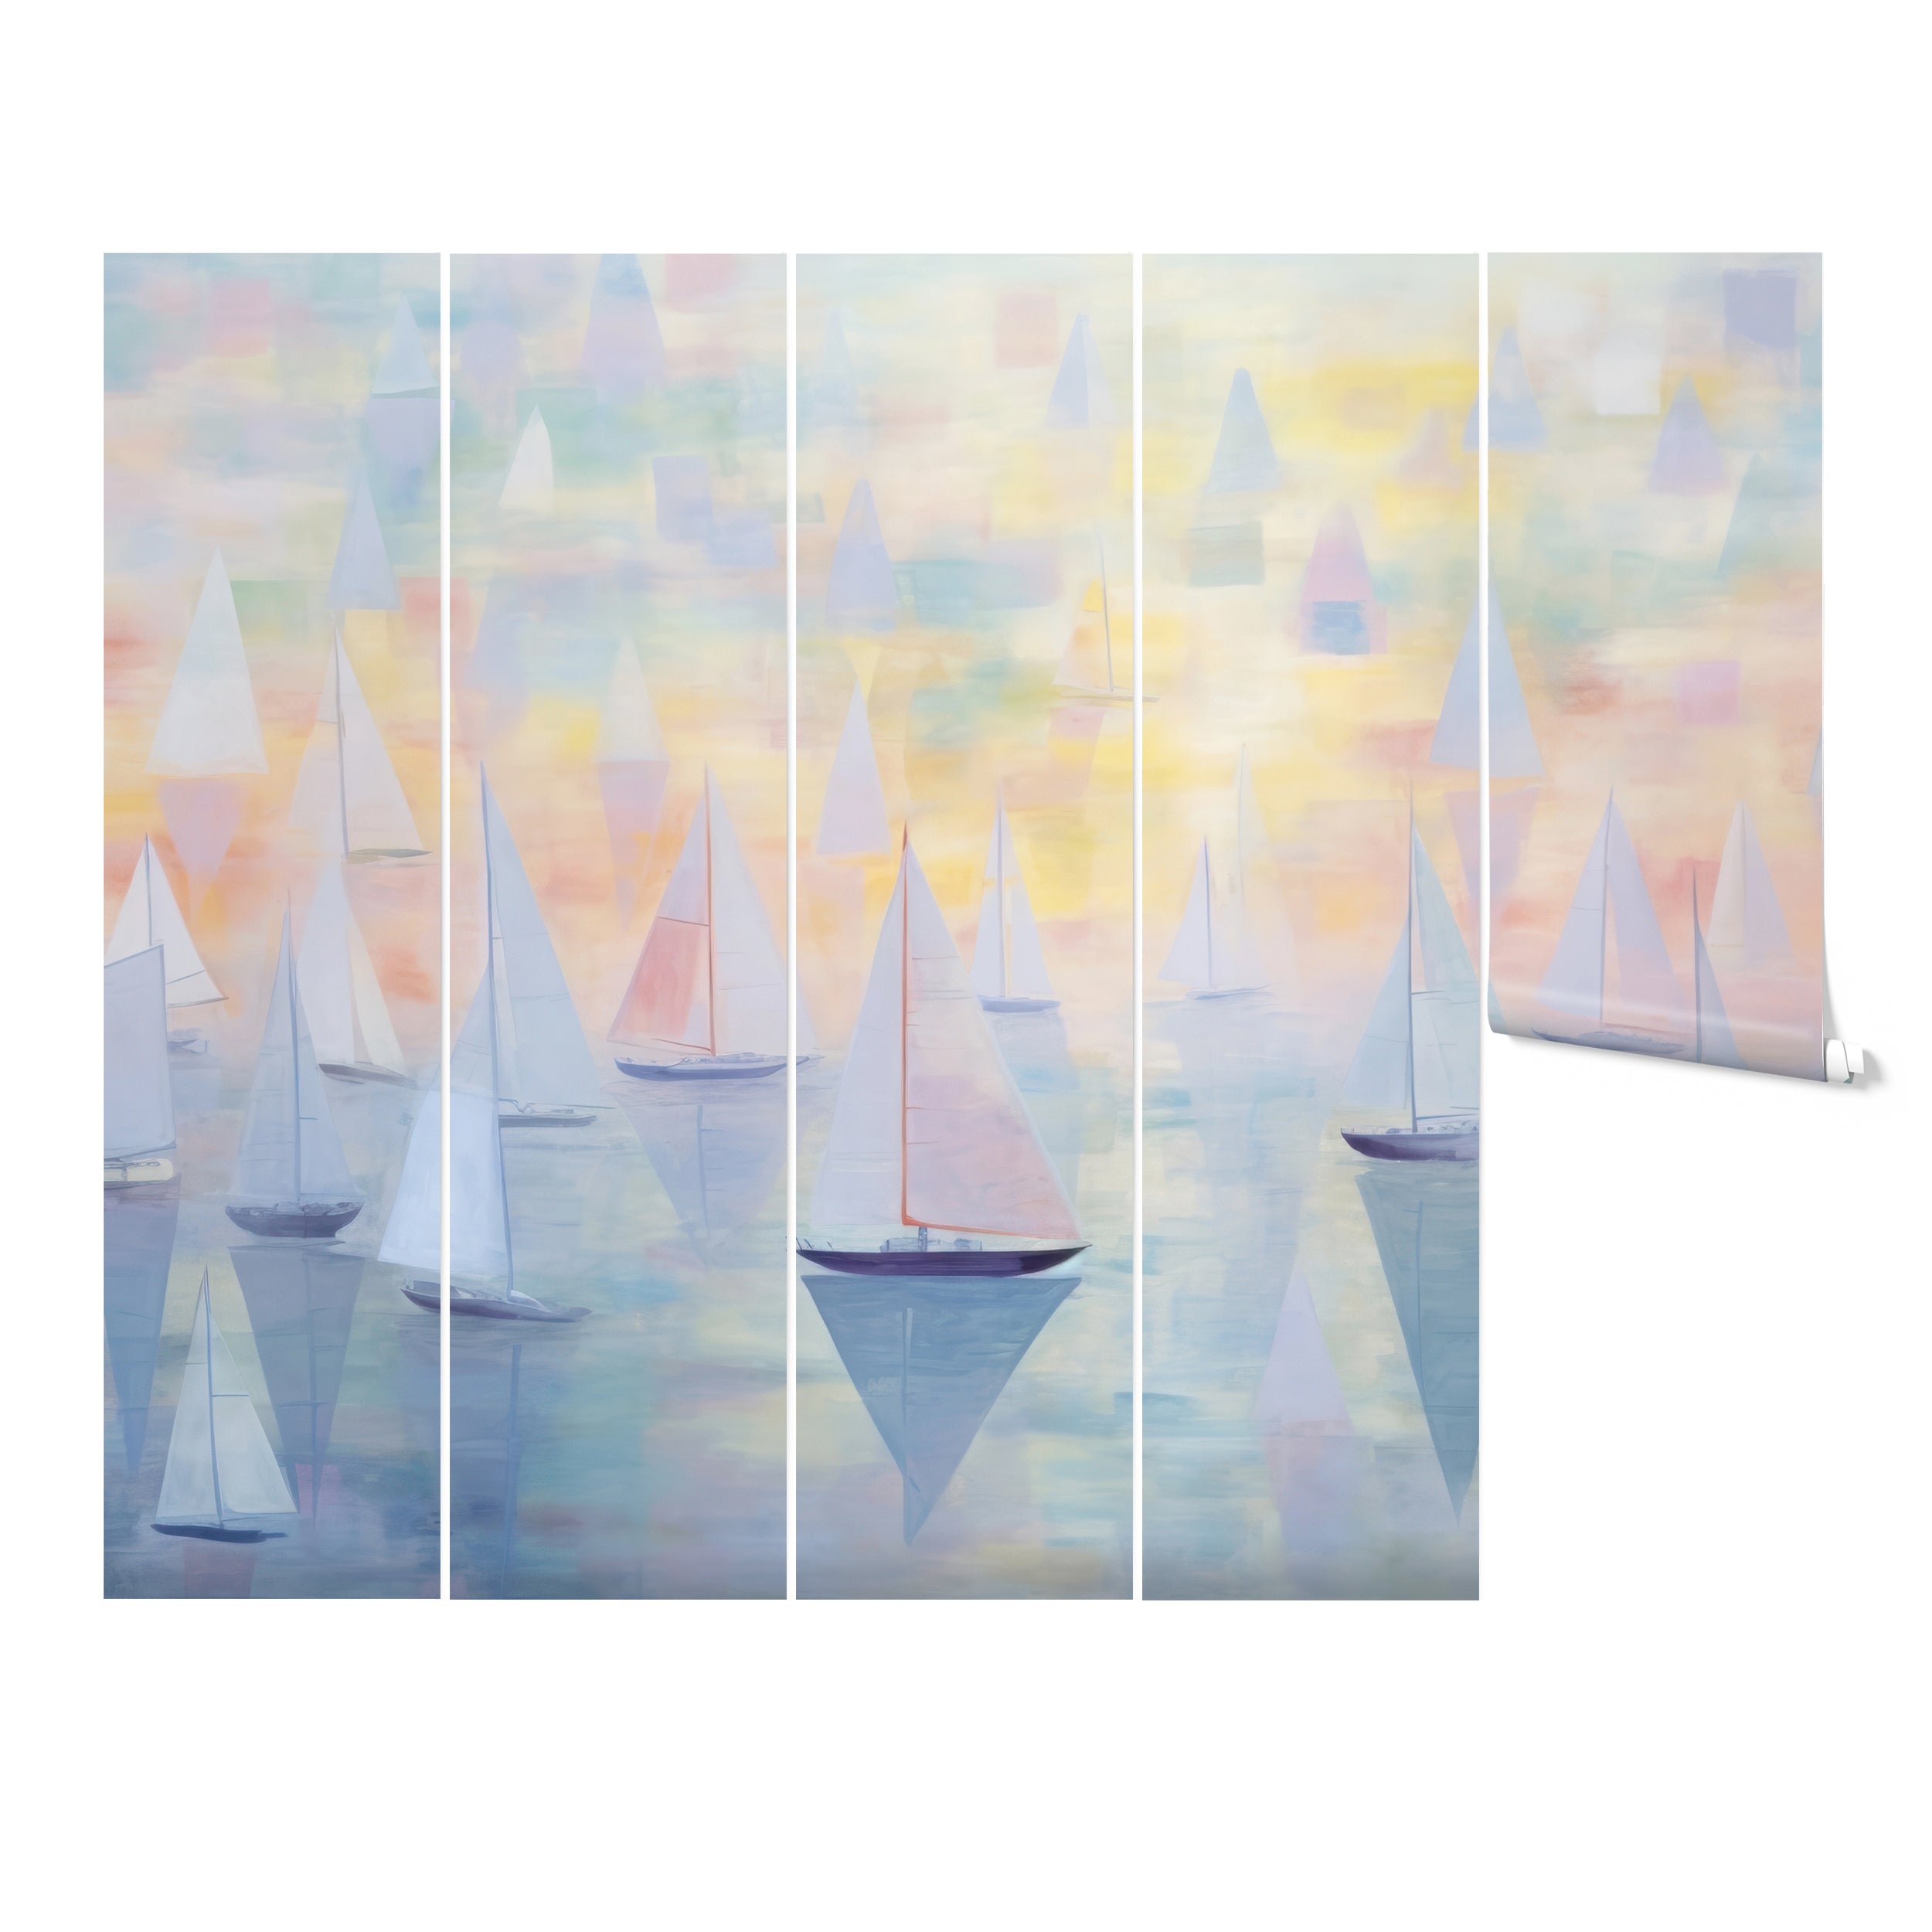 Nursery room decorated with Boracay Sunset Mural, featuring light pastel tones and sailing boat illustrations.